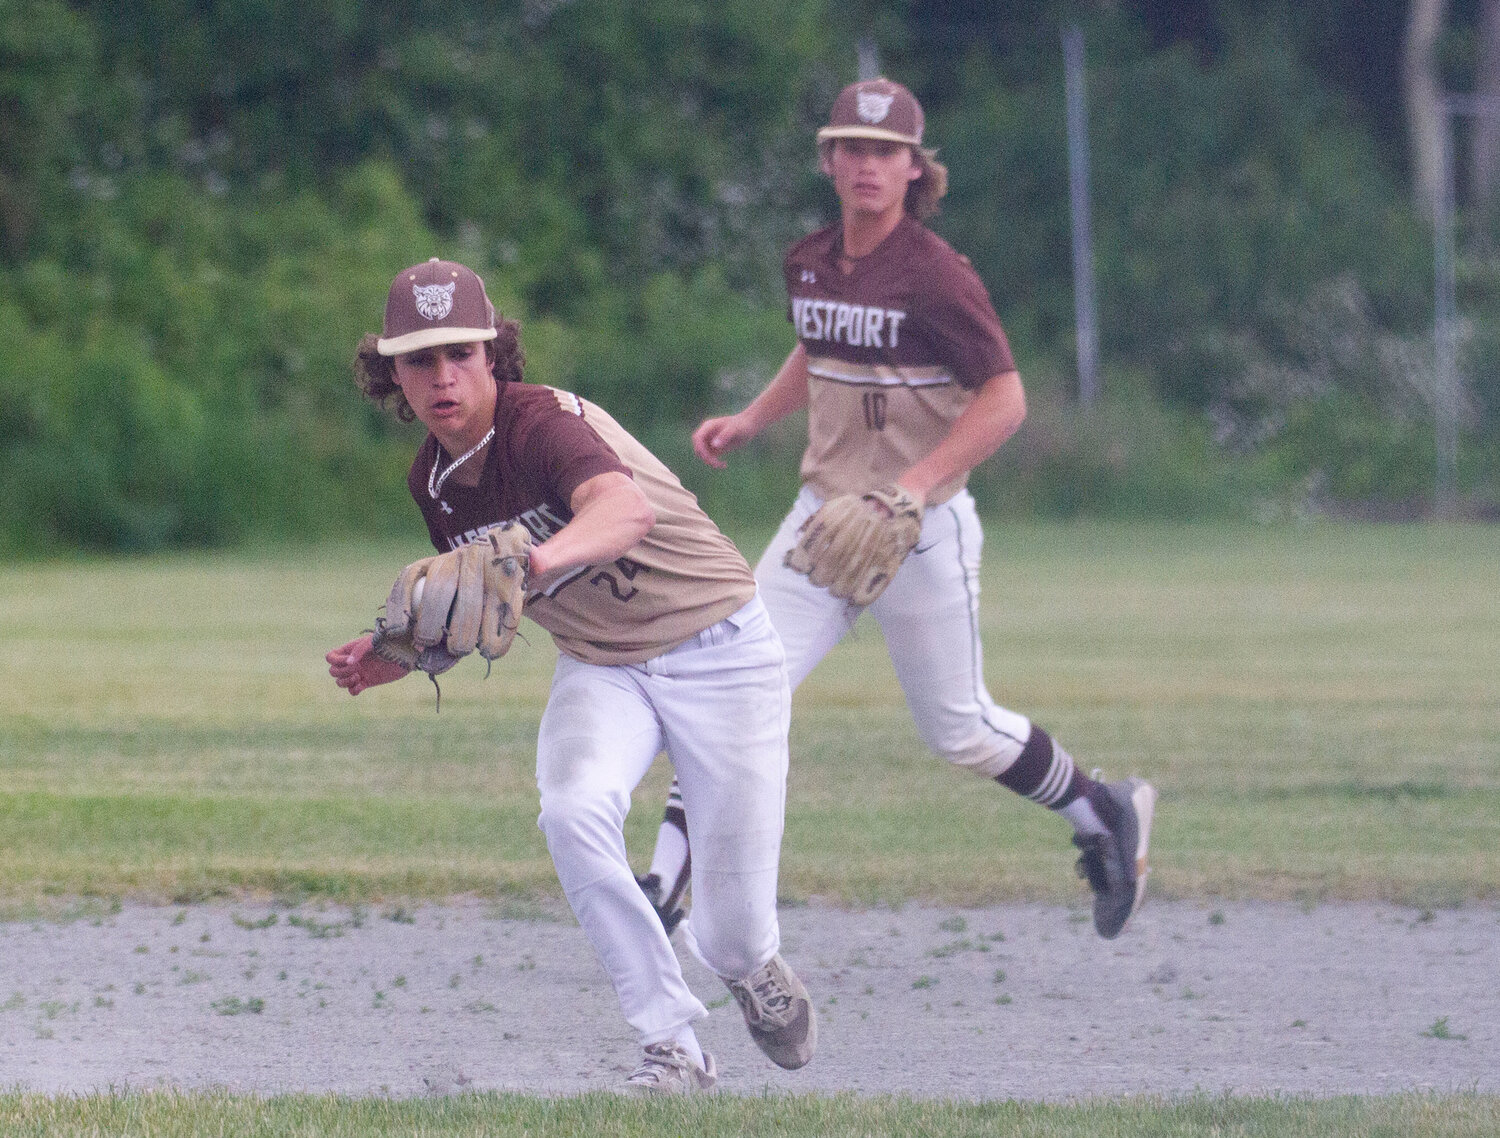 Third baseman Vaughn Costa scoops up a grounder with shortstop Noah Sowle looking on.